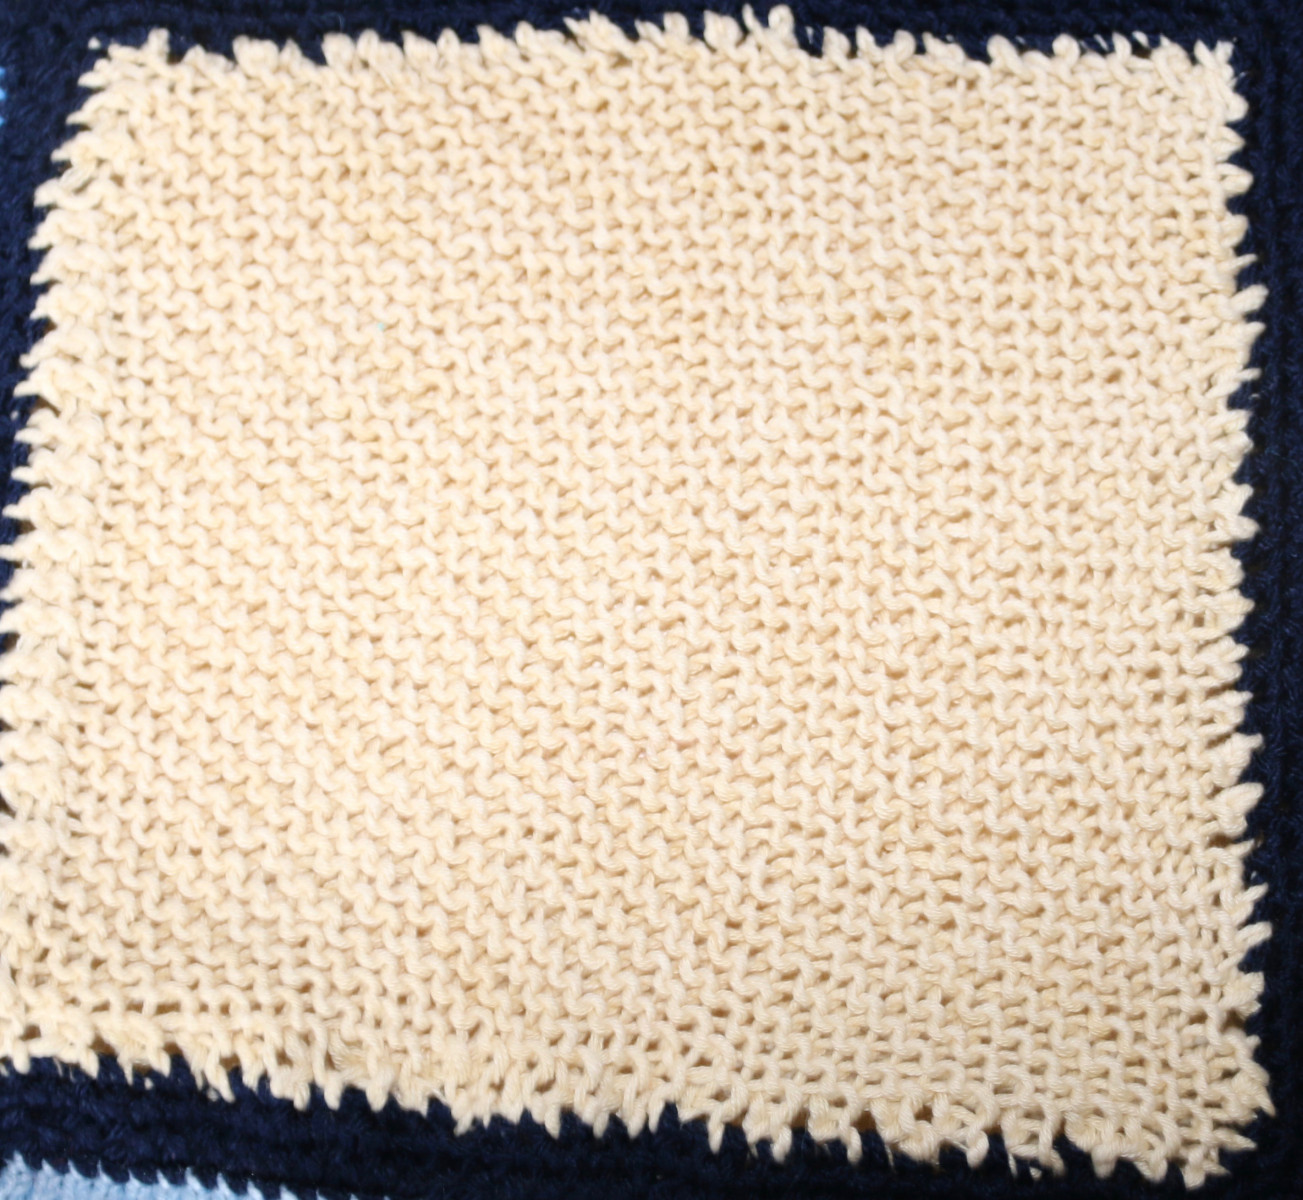 Buttermilk knitted square